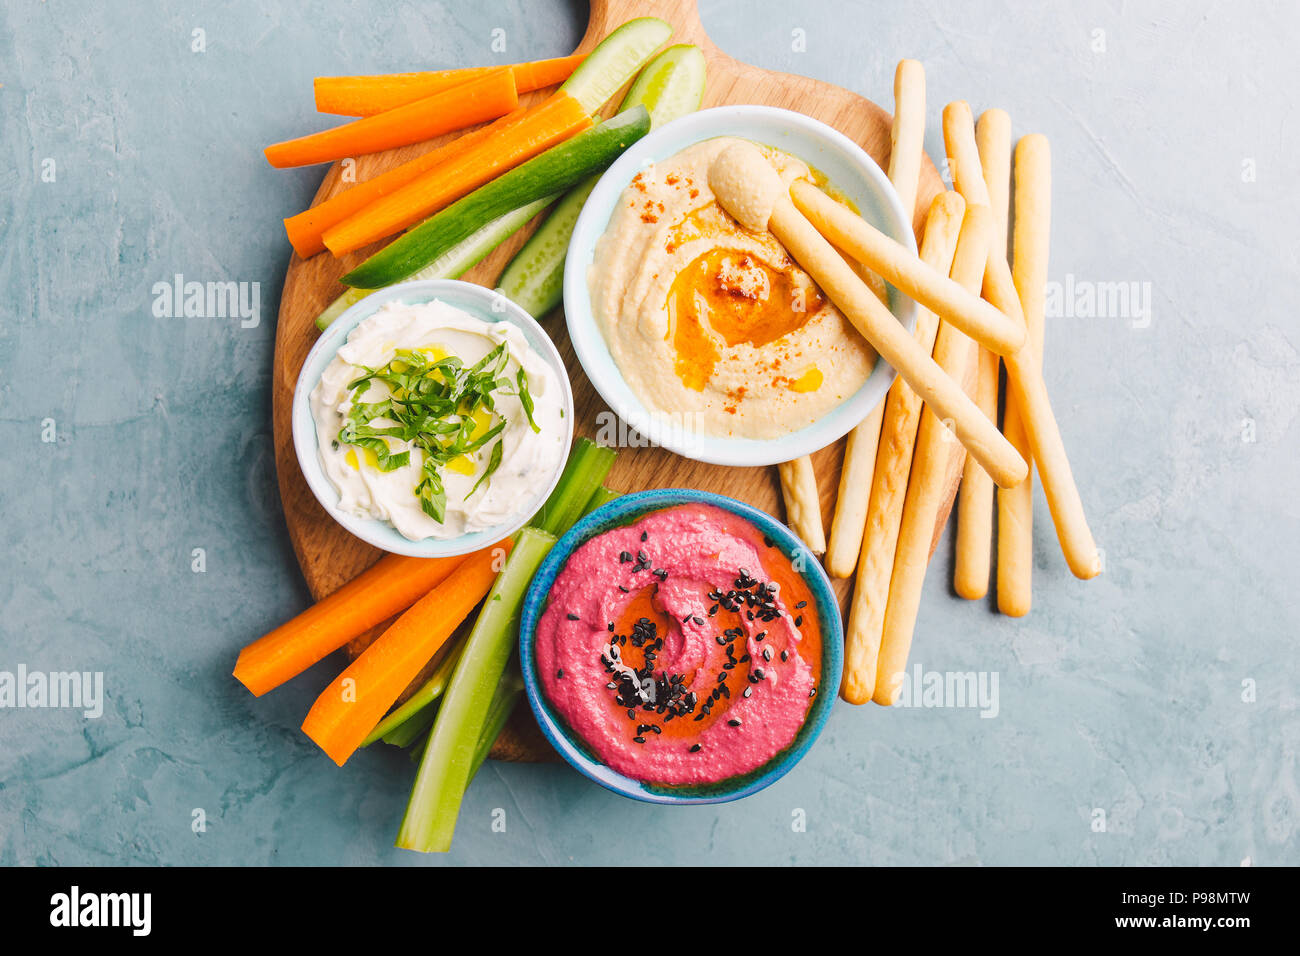 Appetizing vegetarian healthy dips sauces in small bowls with cut vegetables on cutting board. View from above. Healthy detox weight loss concept. Stock Photo